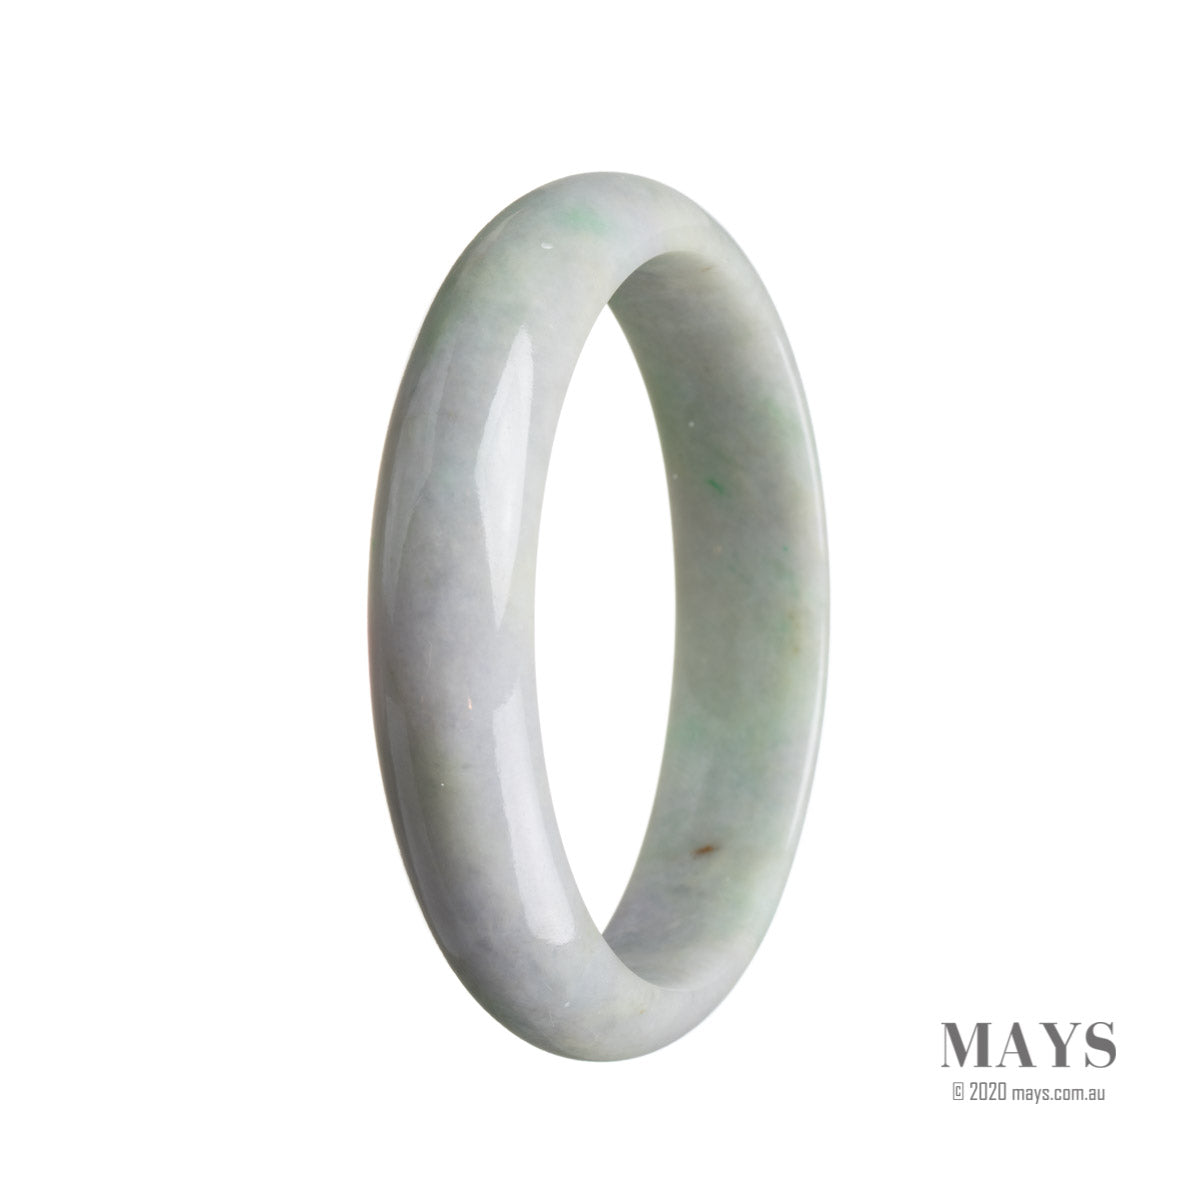 A close-up of a lavender-colored bracelet made of untreated authentic lavender stones and green jade beads. The bracelet is in the shape of a half moon and measures 59mm in diameter. It is a product by MAYS™.